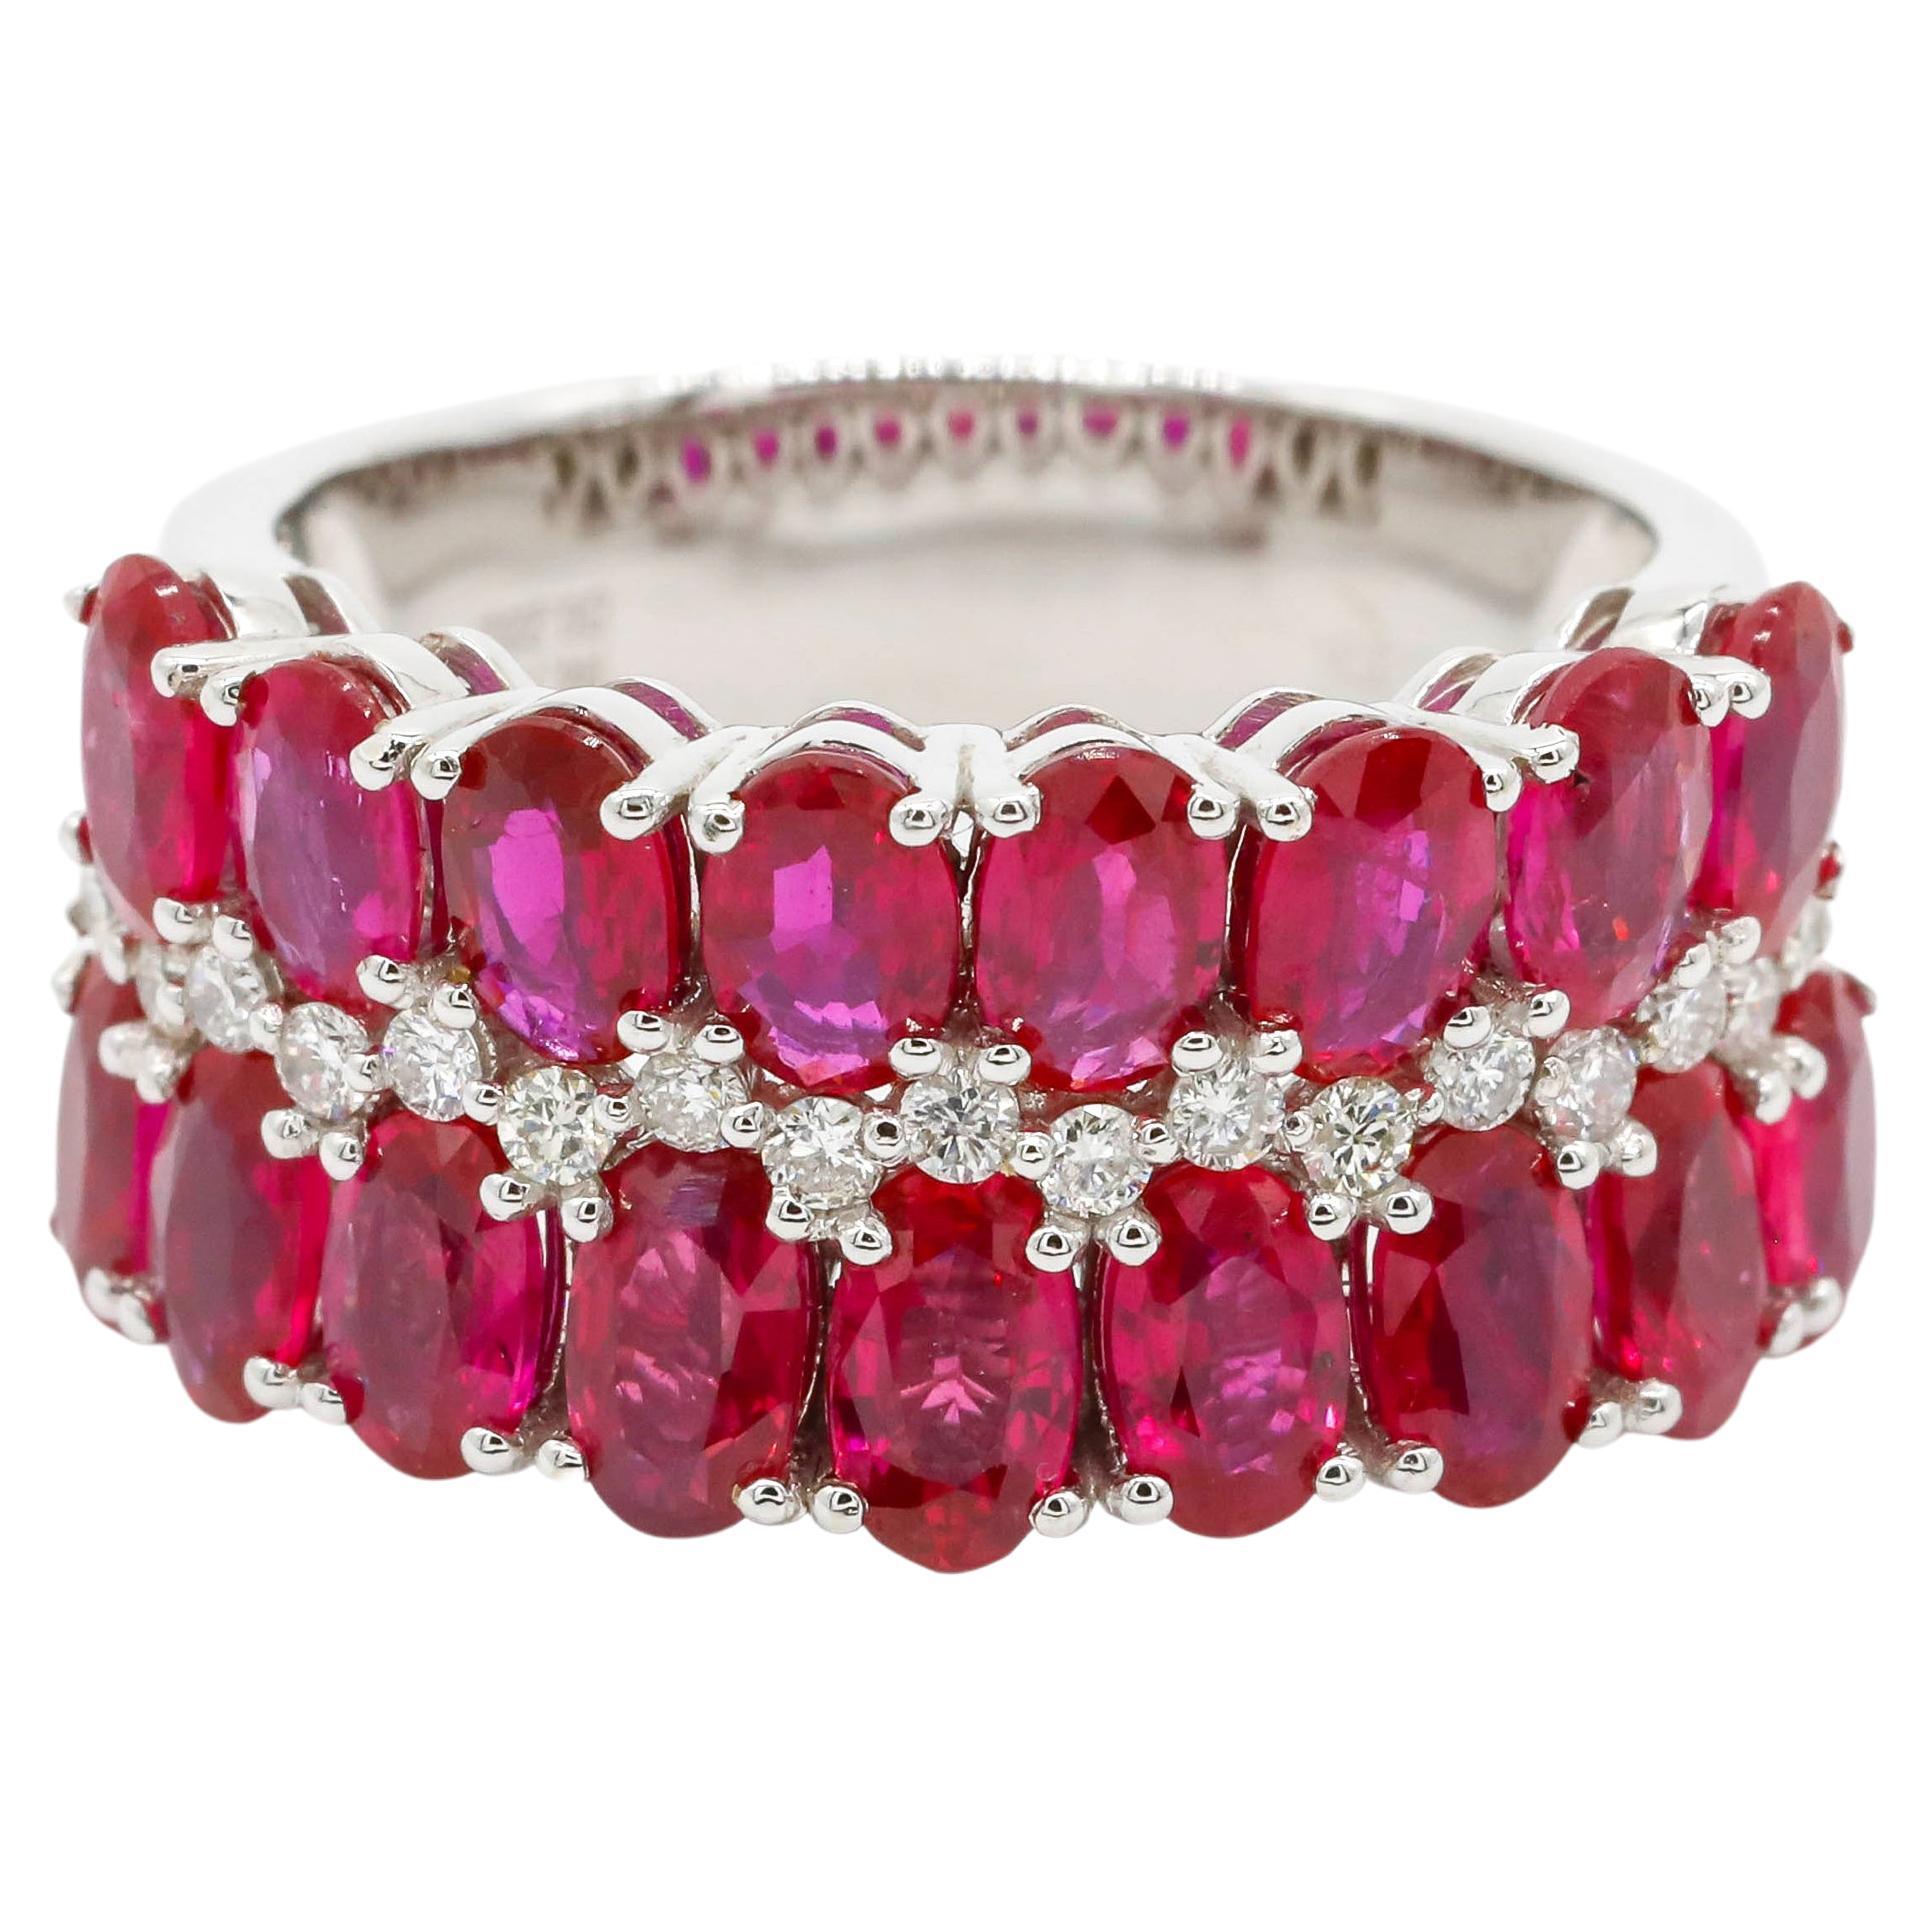 4.75 Carat Oval Cut Ruby and 0.22 Carat Diamond Pave 18K White Gold Cluster Ring For Sale